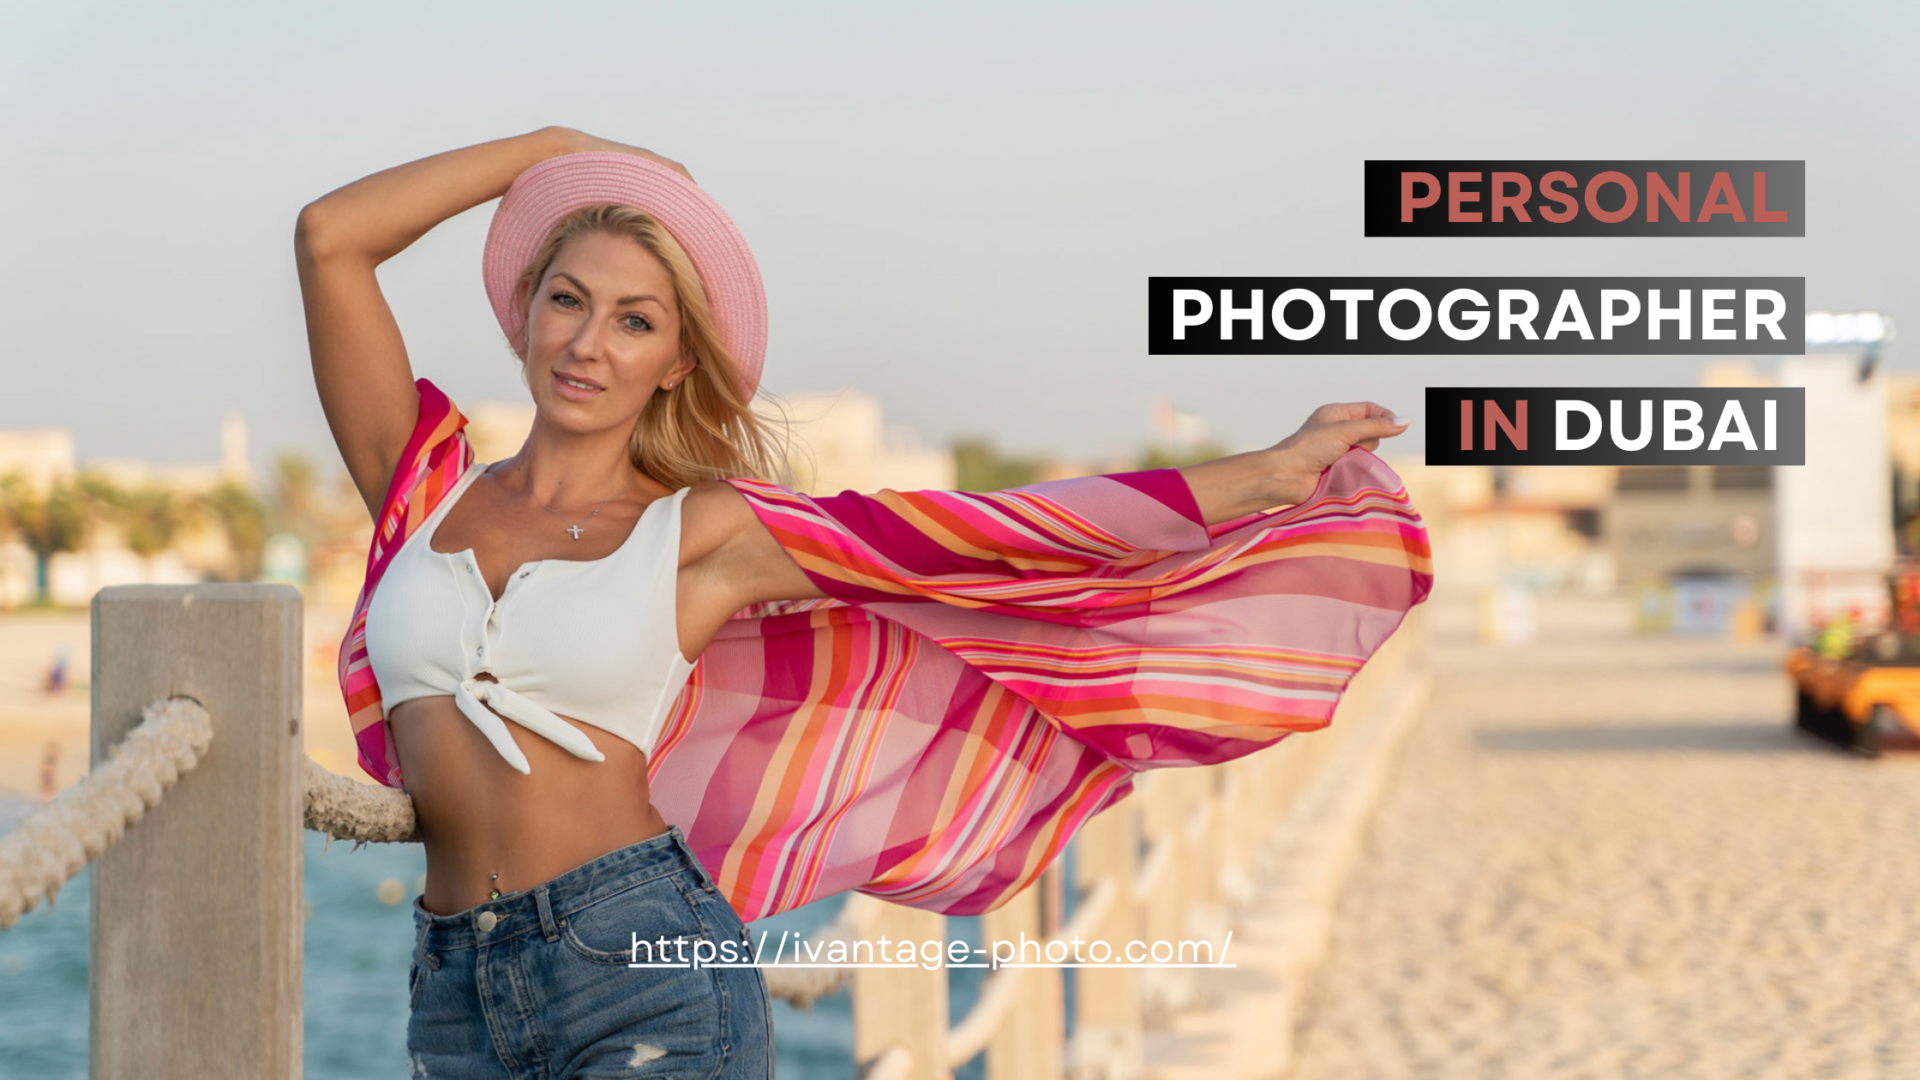 shooting by personal photographer in dubai Model in a summer outfit and hat on Dubai's coastline, with windswept hair.